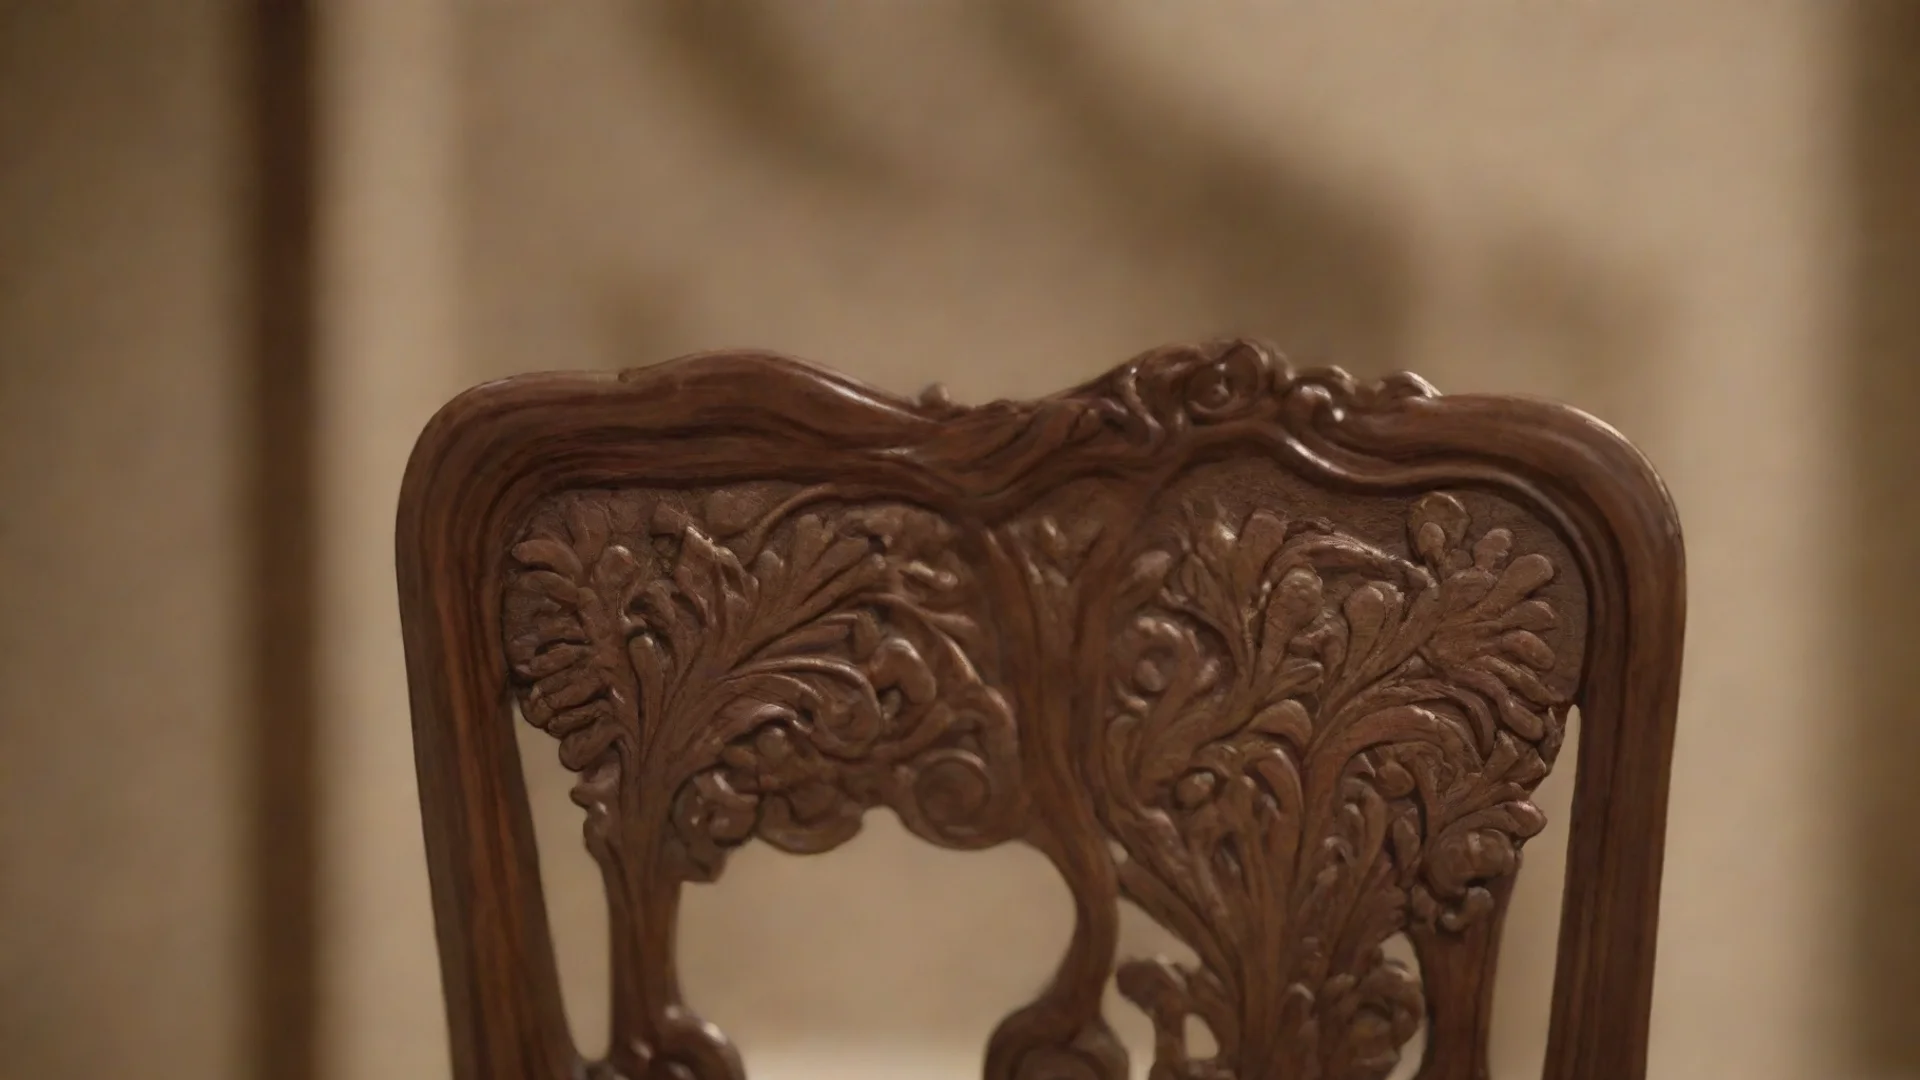 detail view of a decorated chair back dark brown at the edge blurred with high craftsmanship hdwidescreen